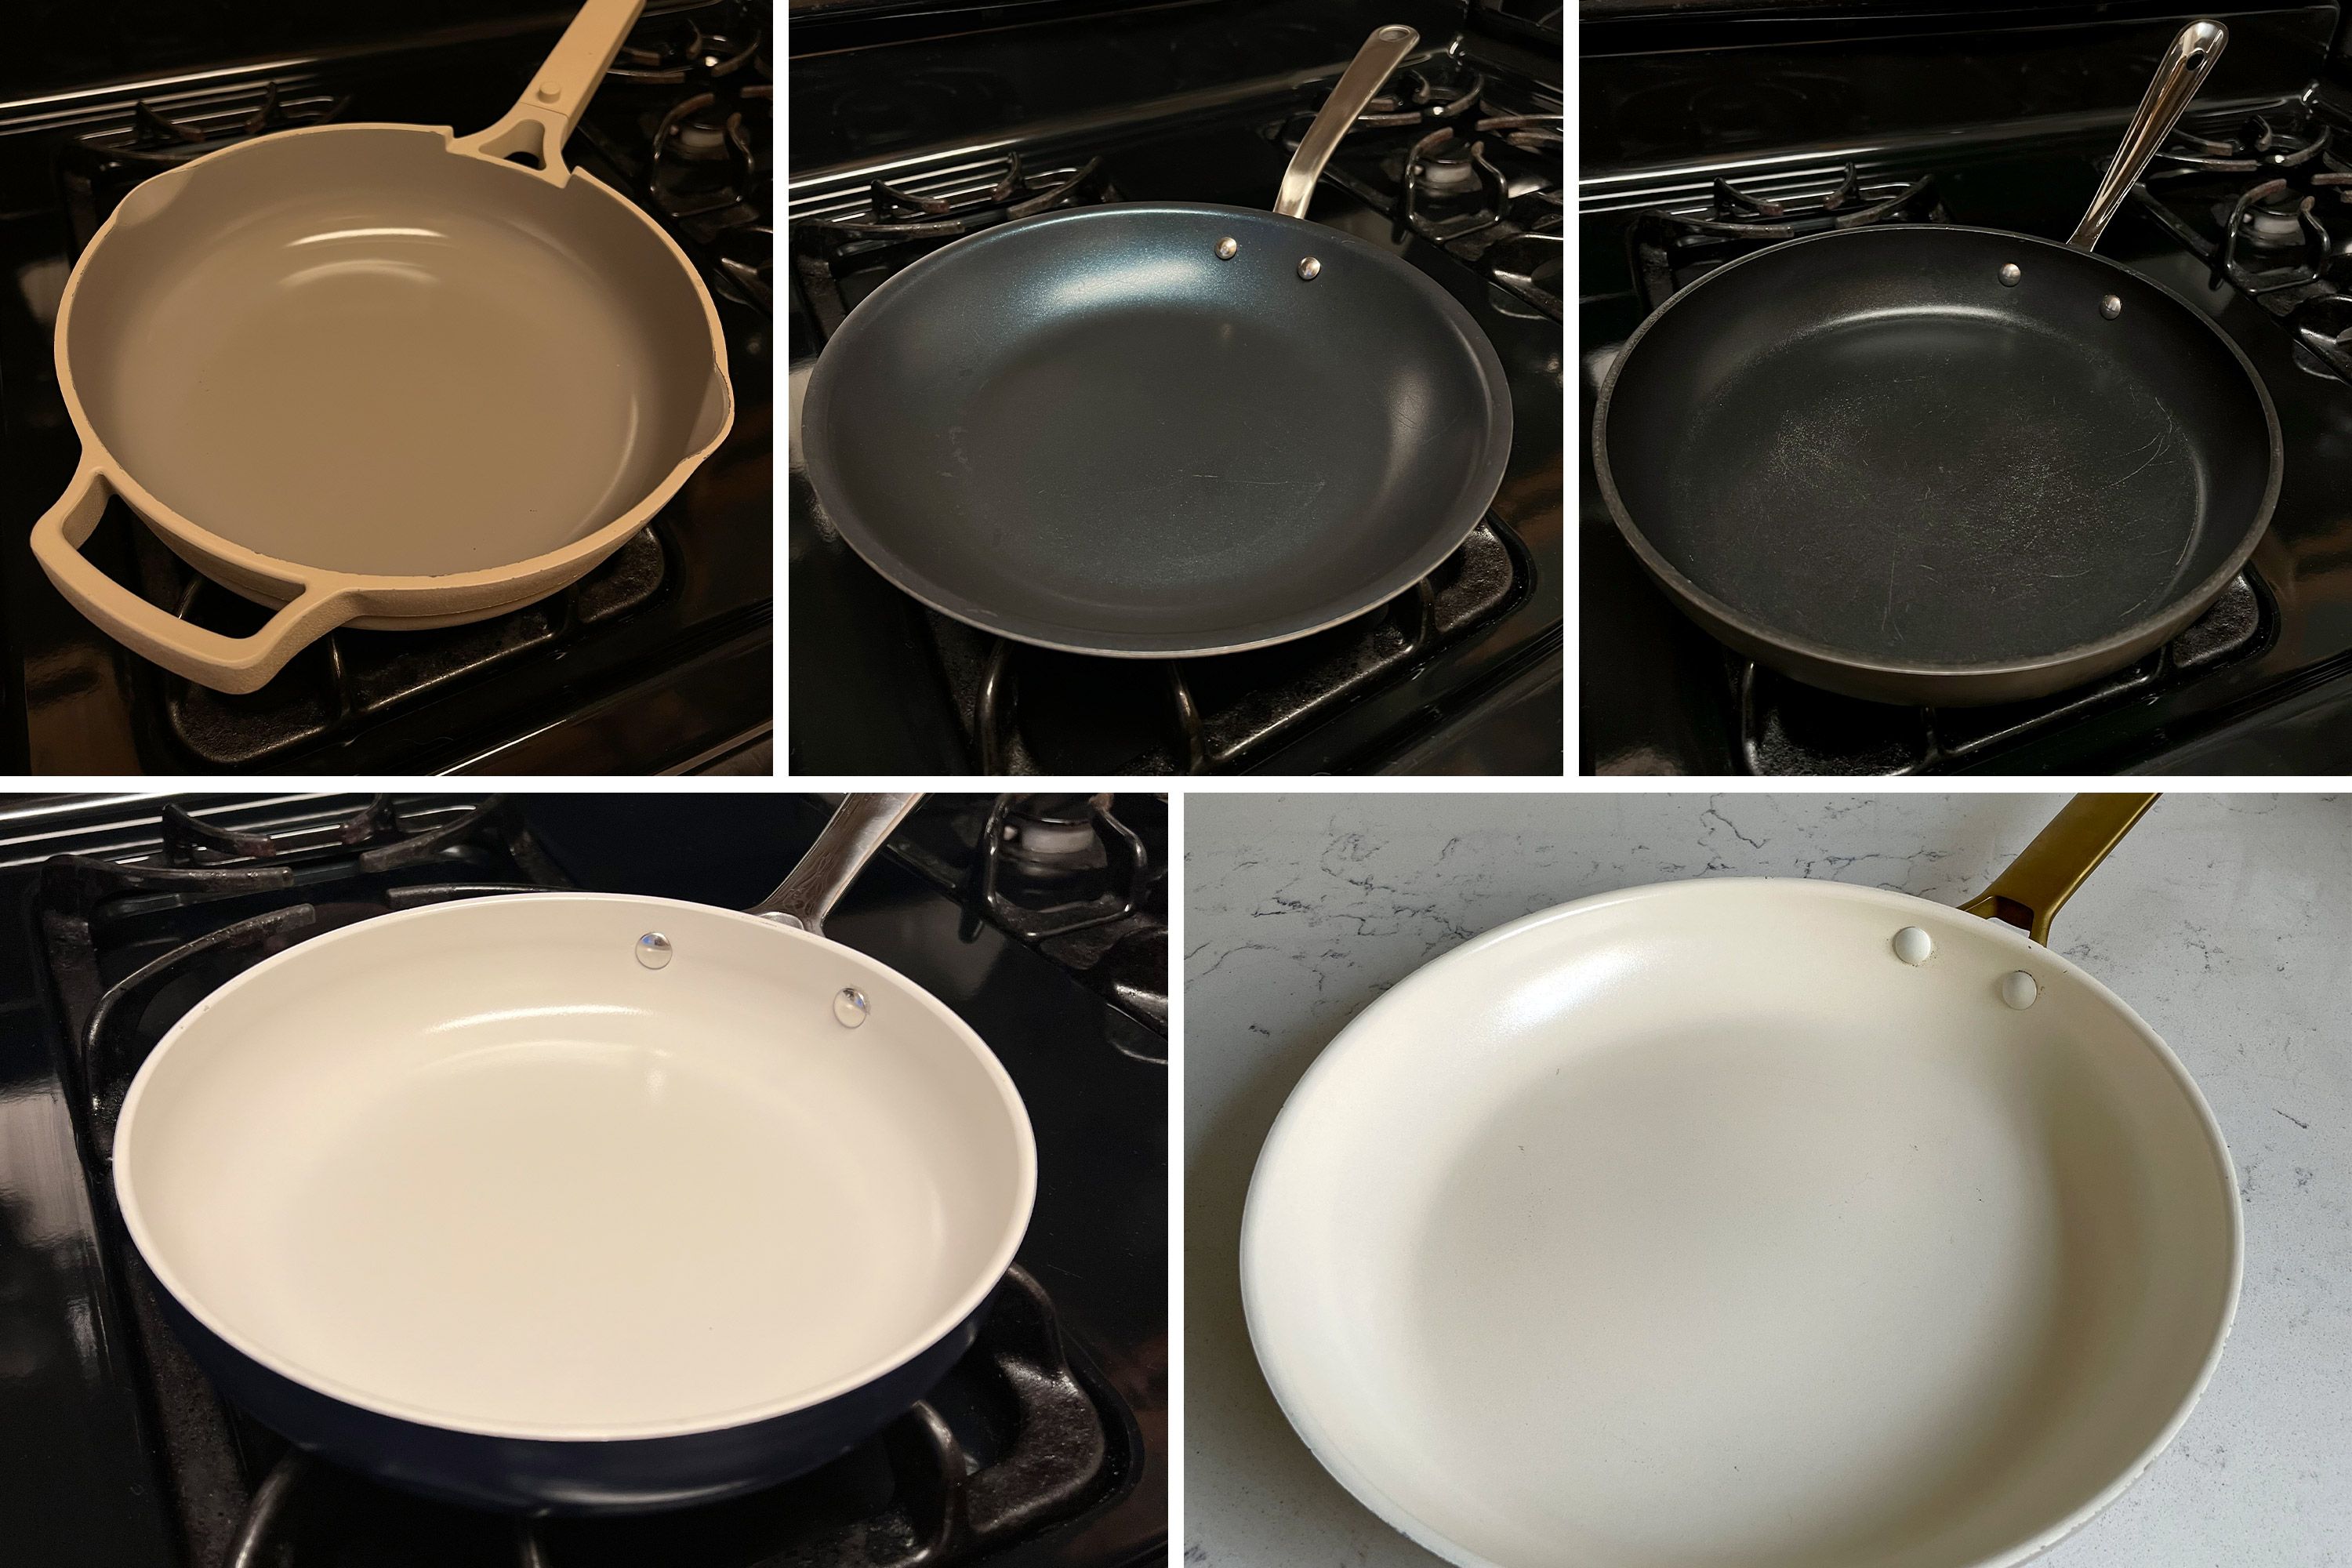 https://hips.hearstapps.com/hmg-prod.s3.amazonaws.com/images/best-non-stick-pans-how-we-tested-1648504549.jpg